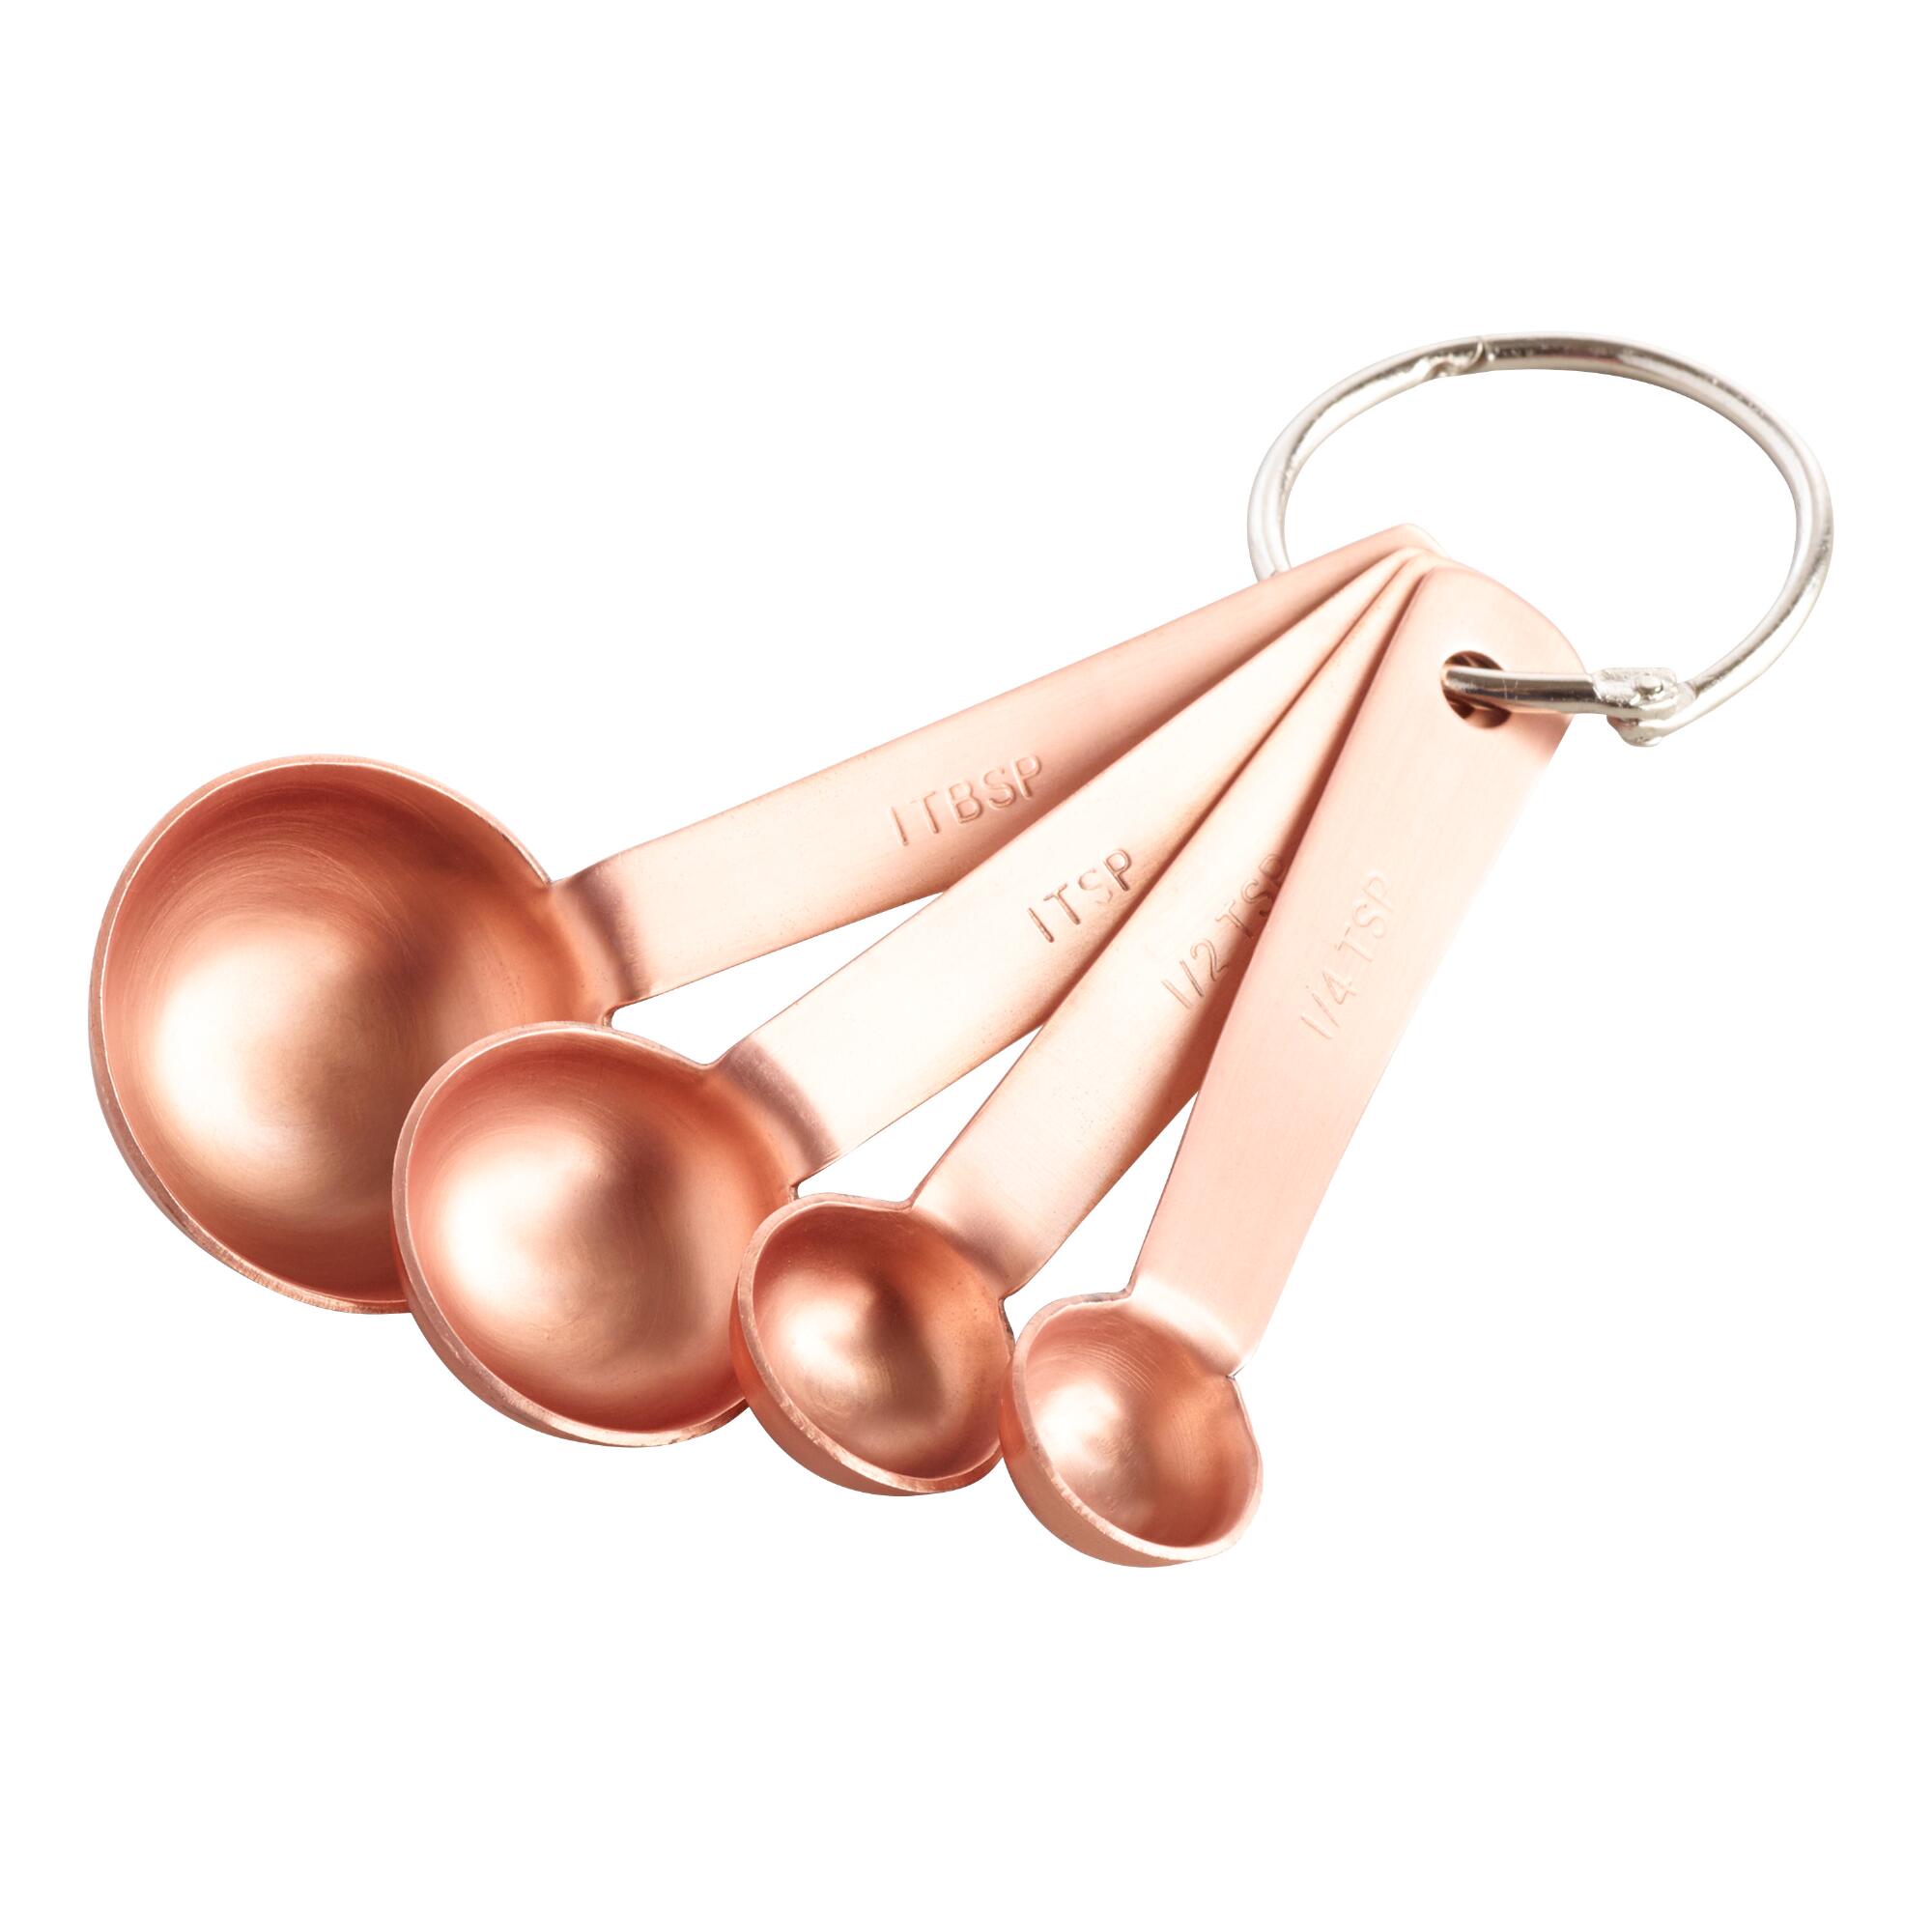 Copper Nesting Measuring Spoons by World Market